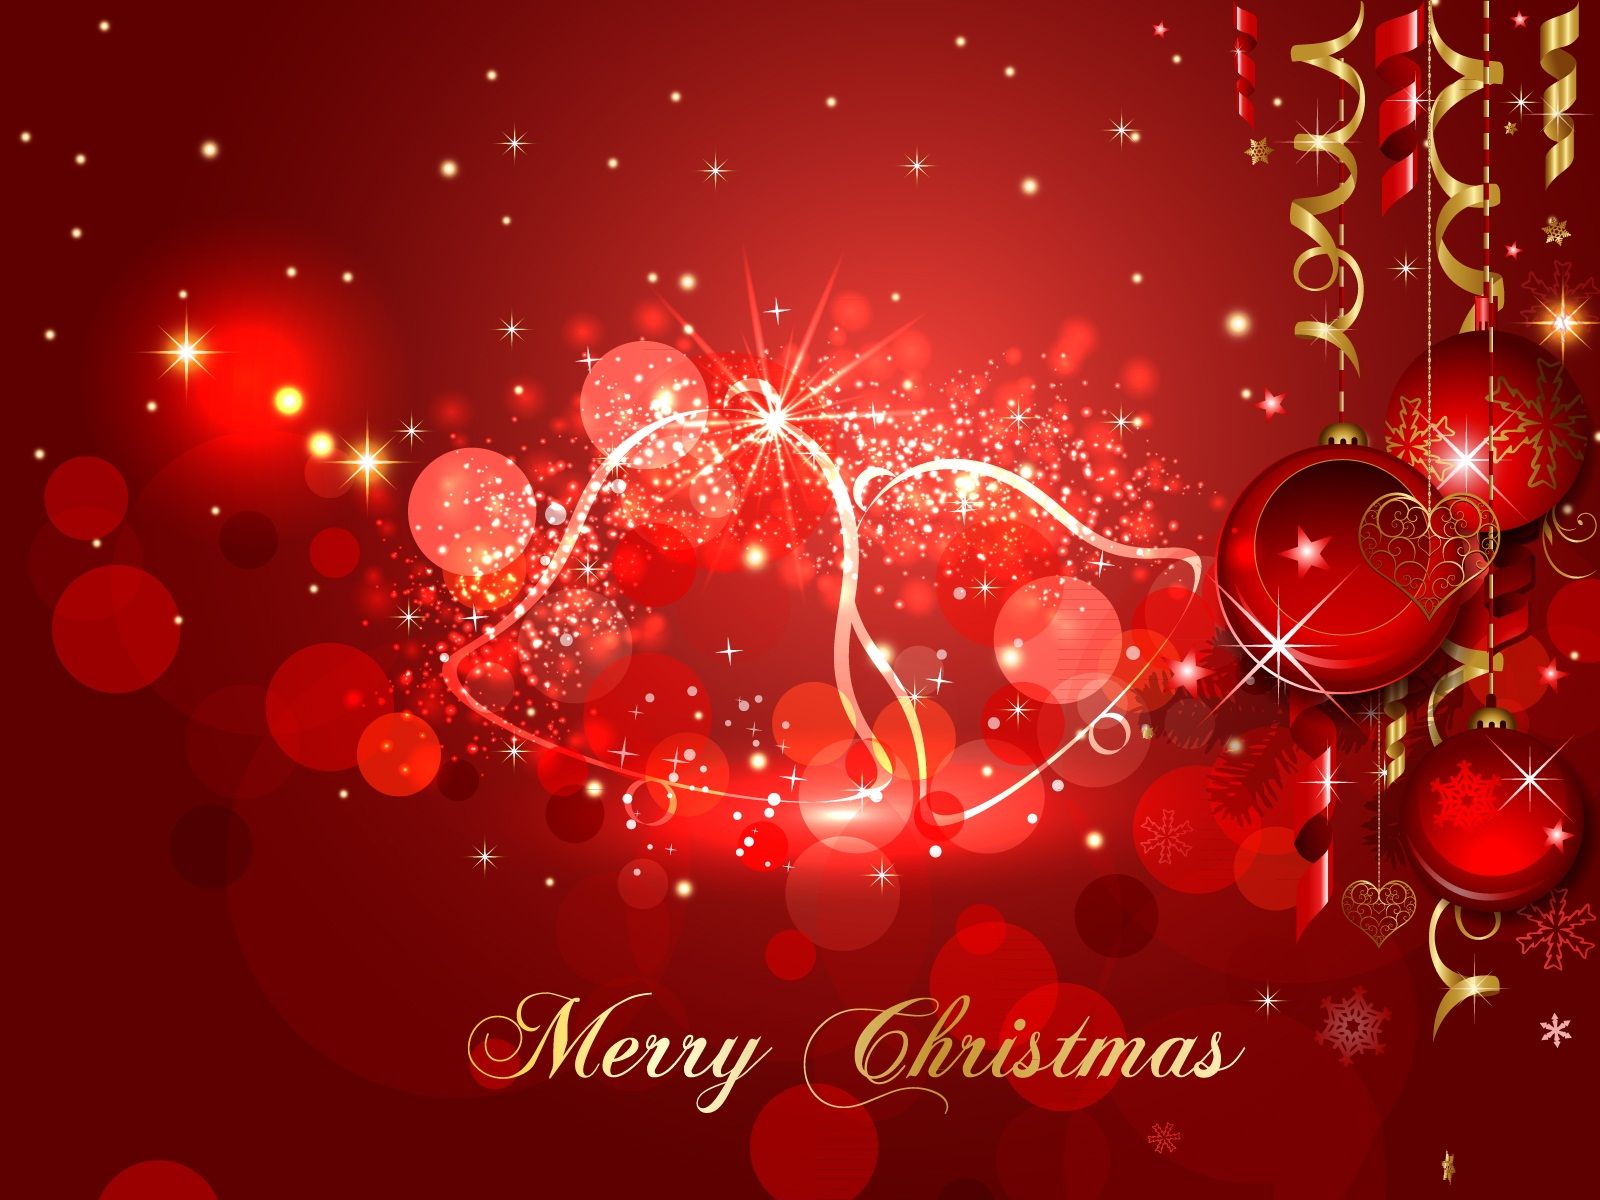 Merry Christmas Lights Wallpapers | Wallpapers, Backgrounds ...